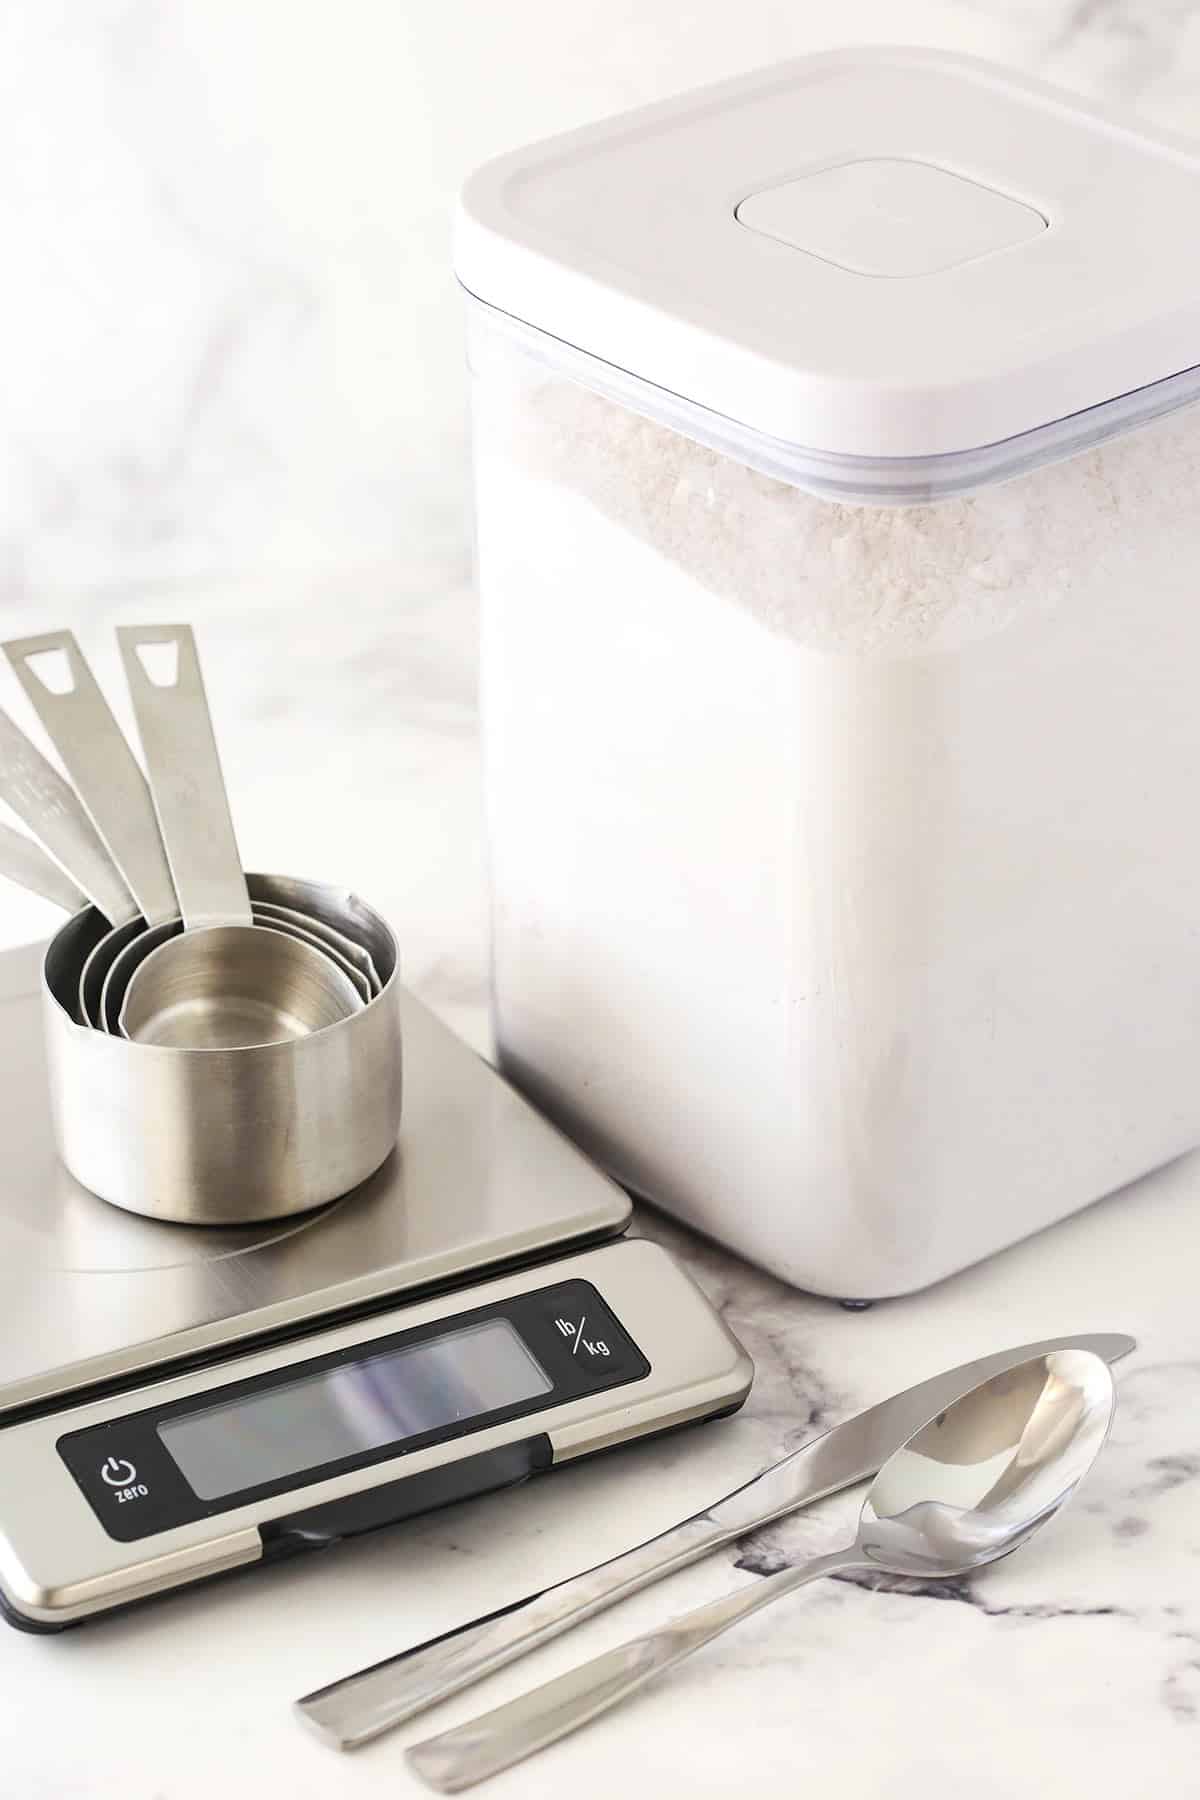 A container full of flour beside a food scale, a set of measuring cups, a fork and a butter knife